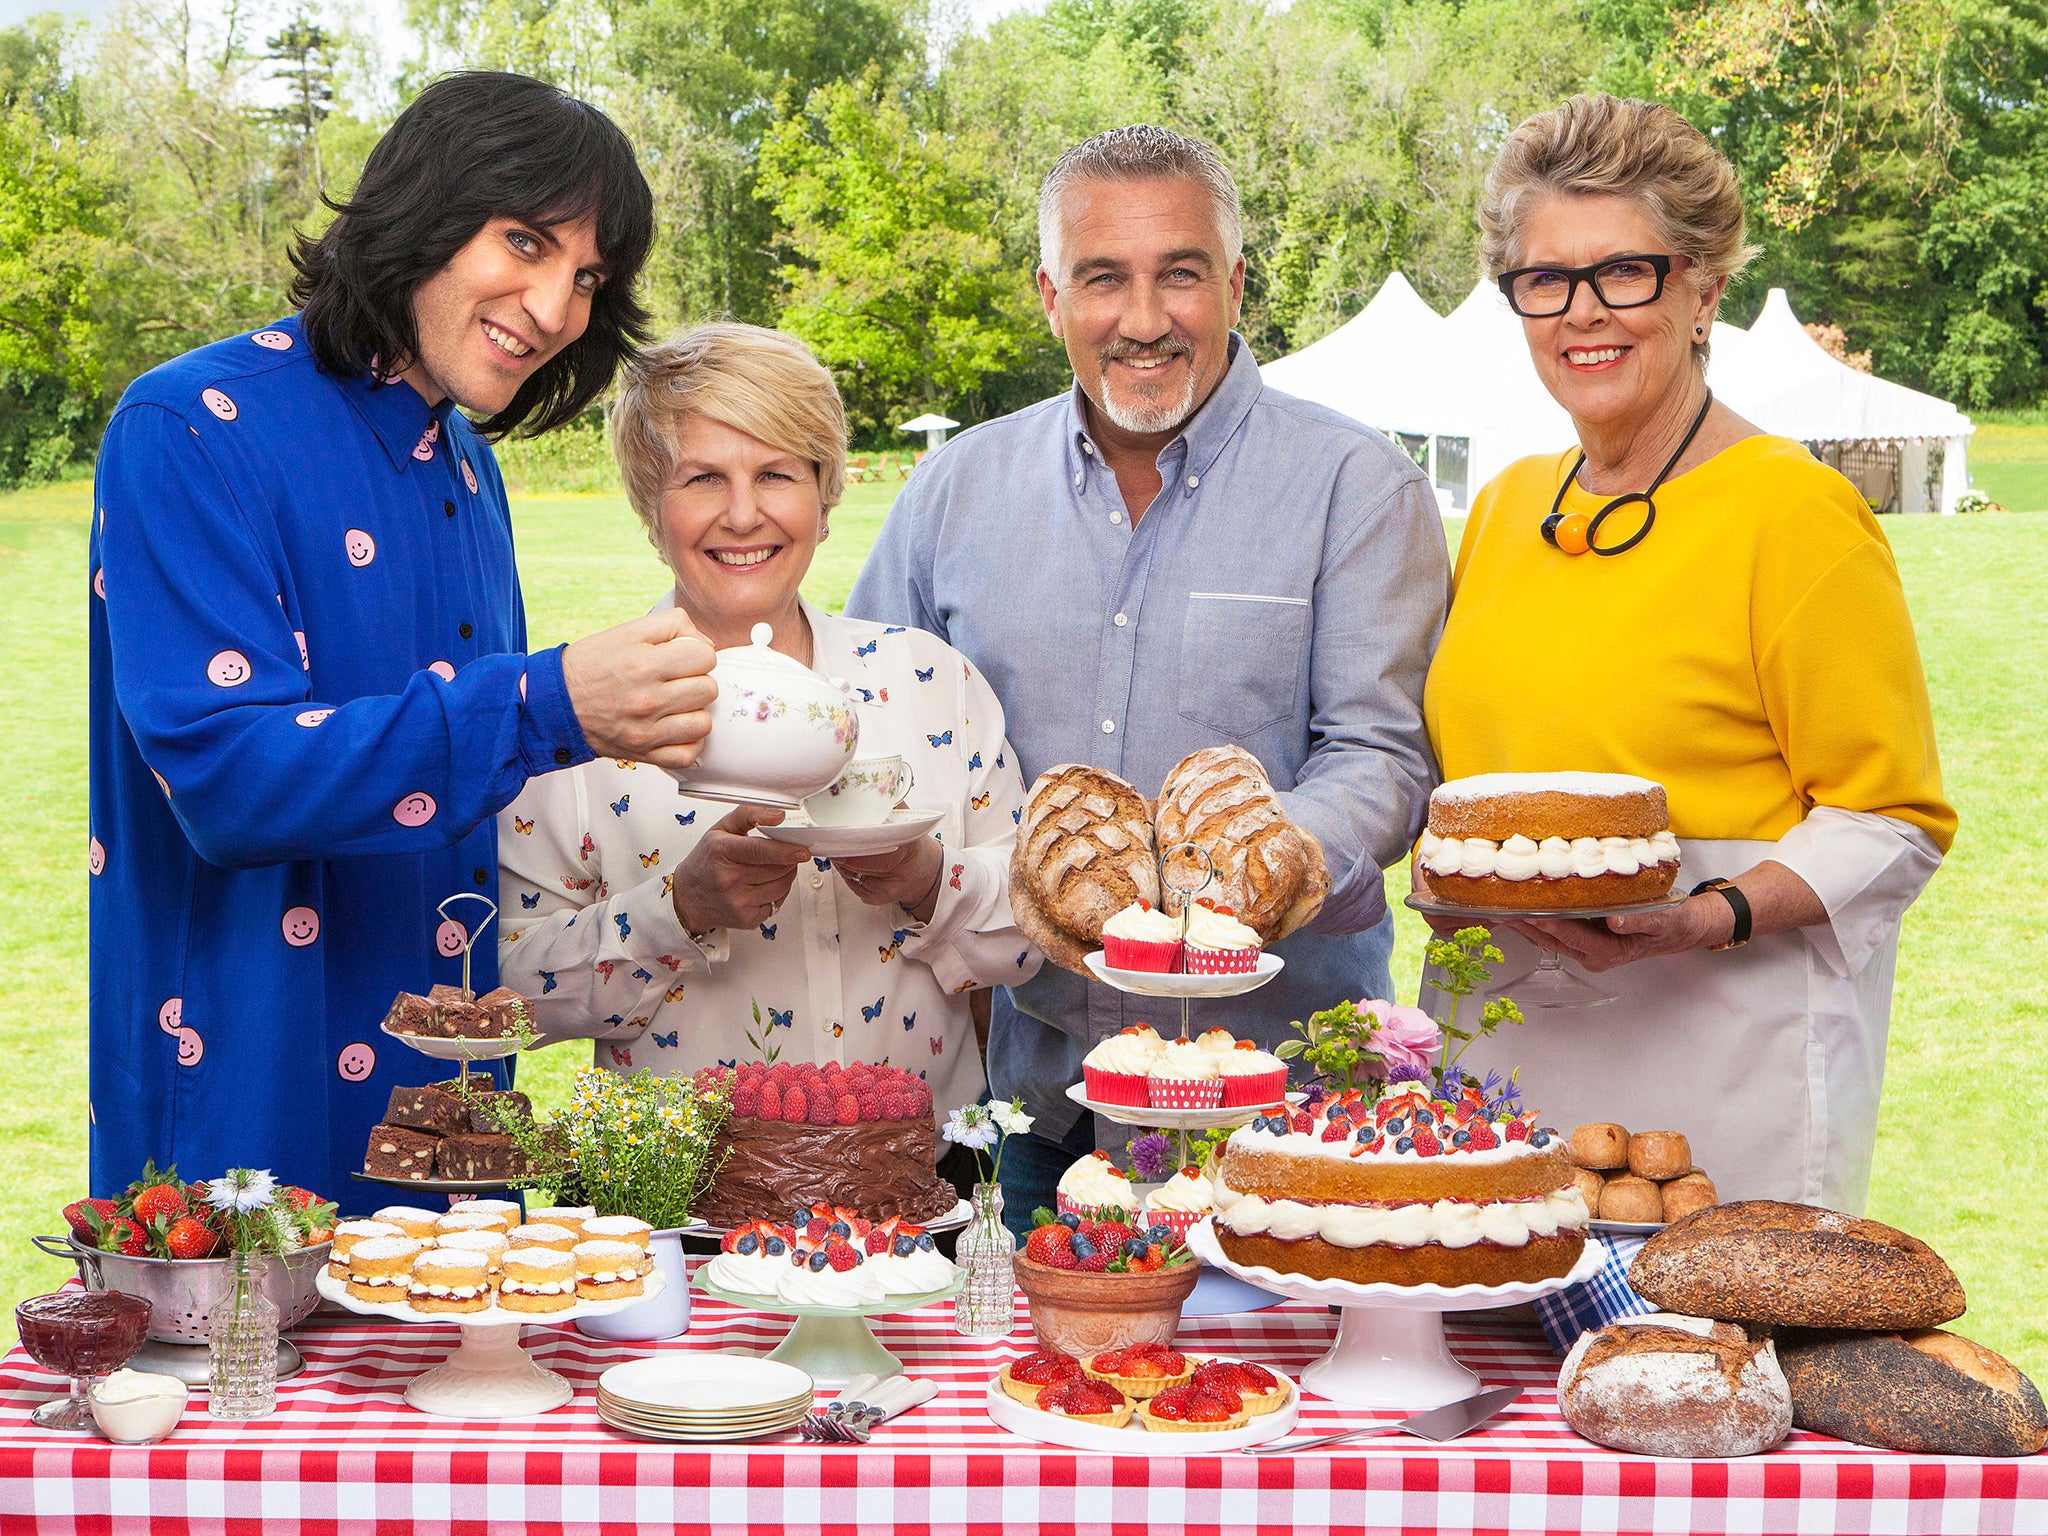 The judges and presenters of The Great British Bake Off 2017 (left to right) Noel Fielding, Sandi Toksvig, Paul Hollywood and Prue Leith